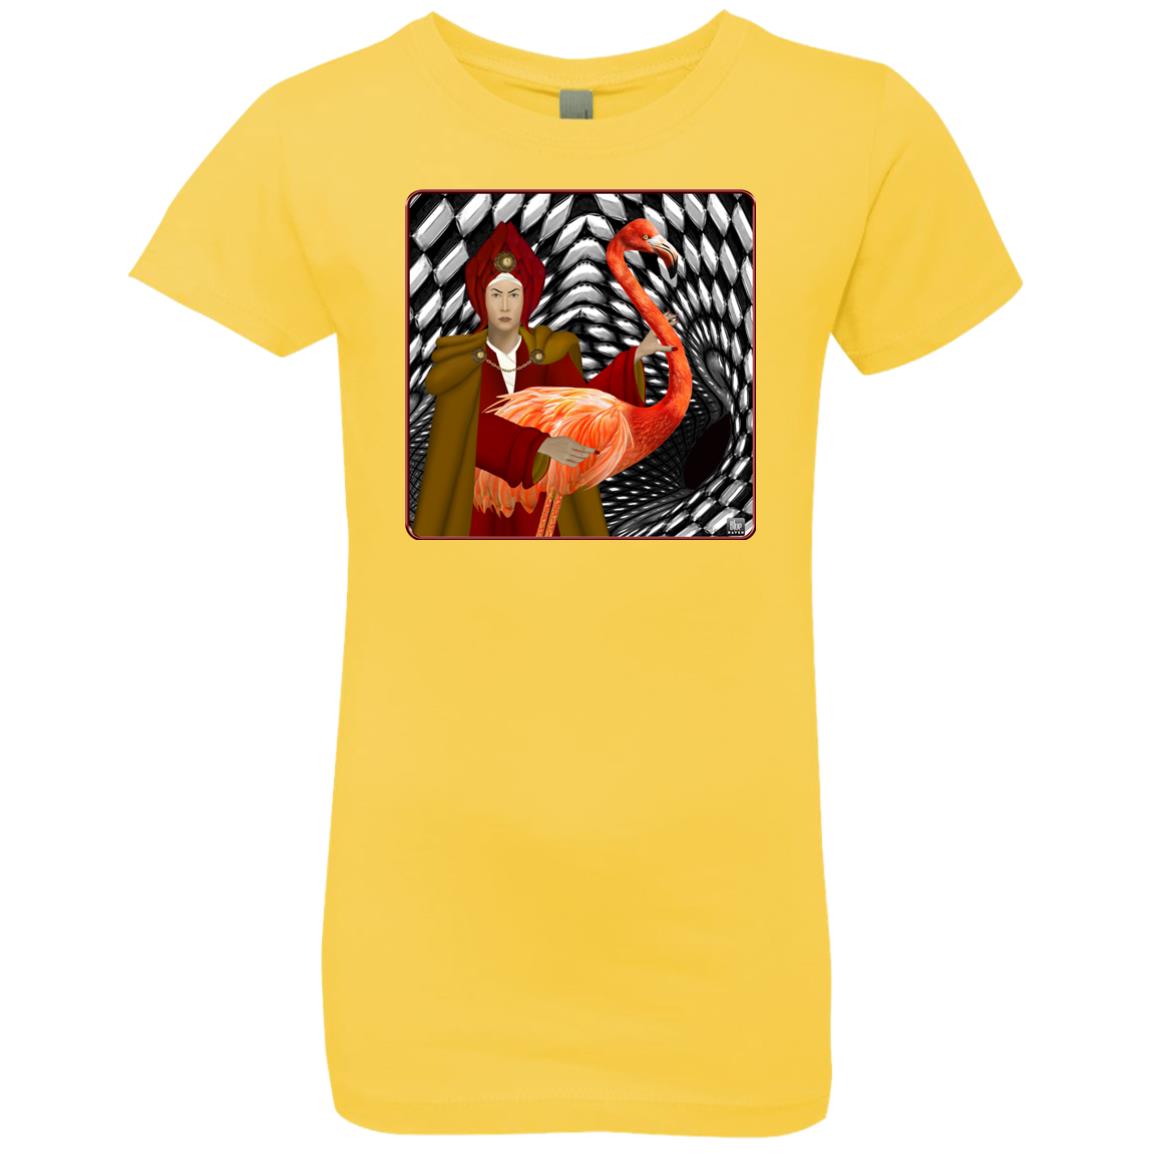 THE RED QUEEN with the flamingo - Girl's Premium Cotton T-Shirt